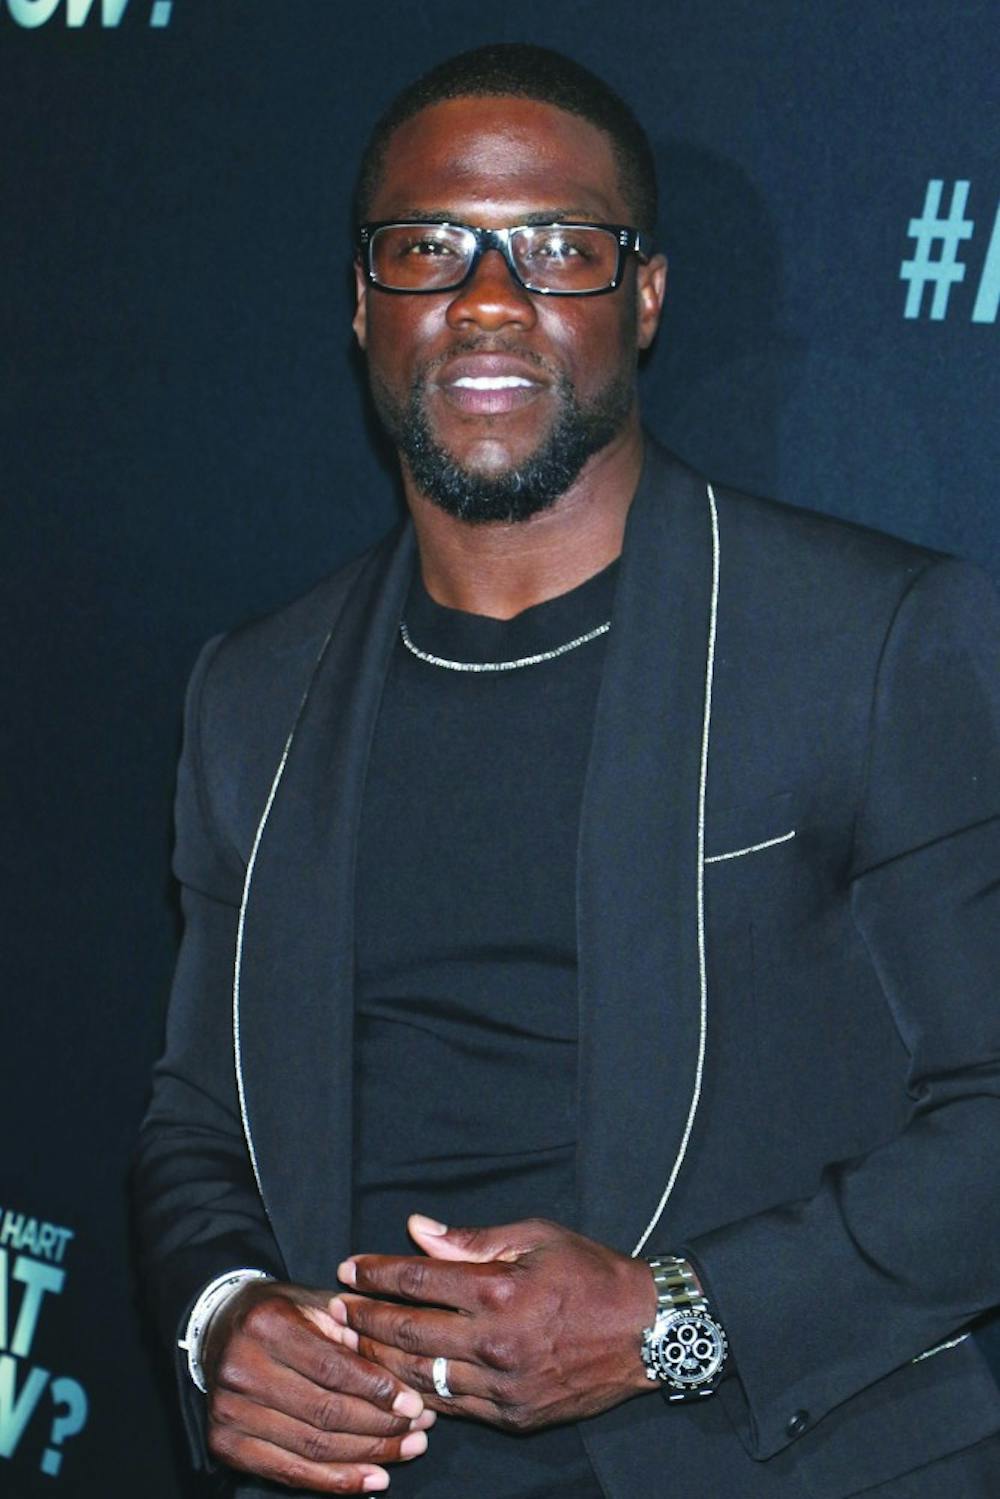 Kevin Hart faces controversy as tweets from 2010 resurface after he is announced as the host of The Oscars 2019. (Gregory Pace/Zuma Press/TNS PHOTO)